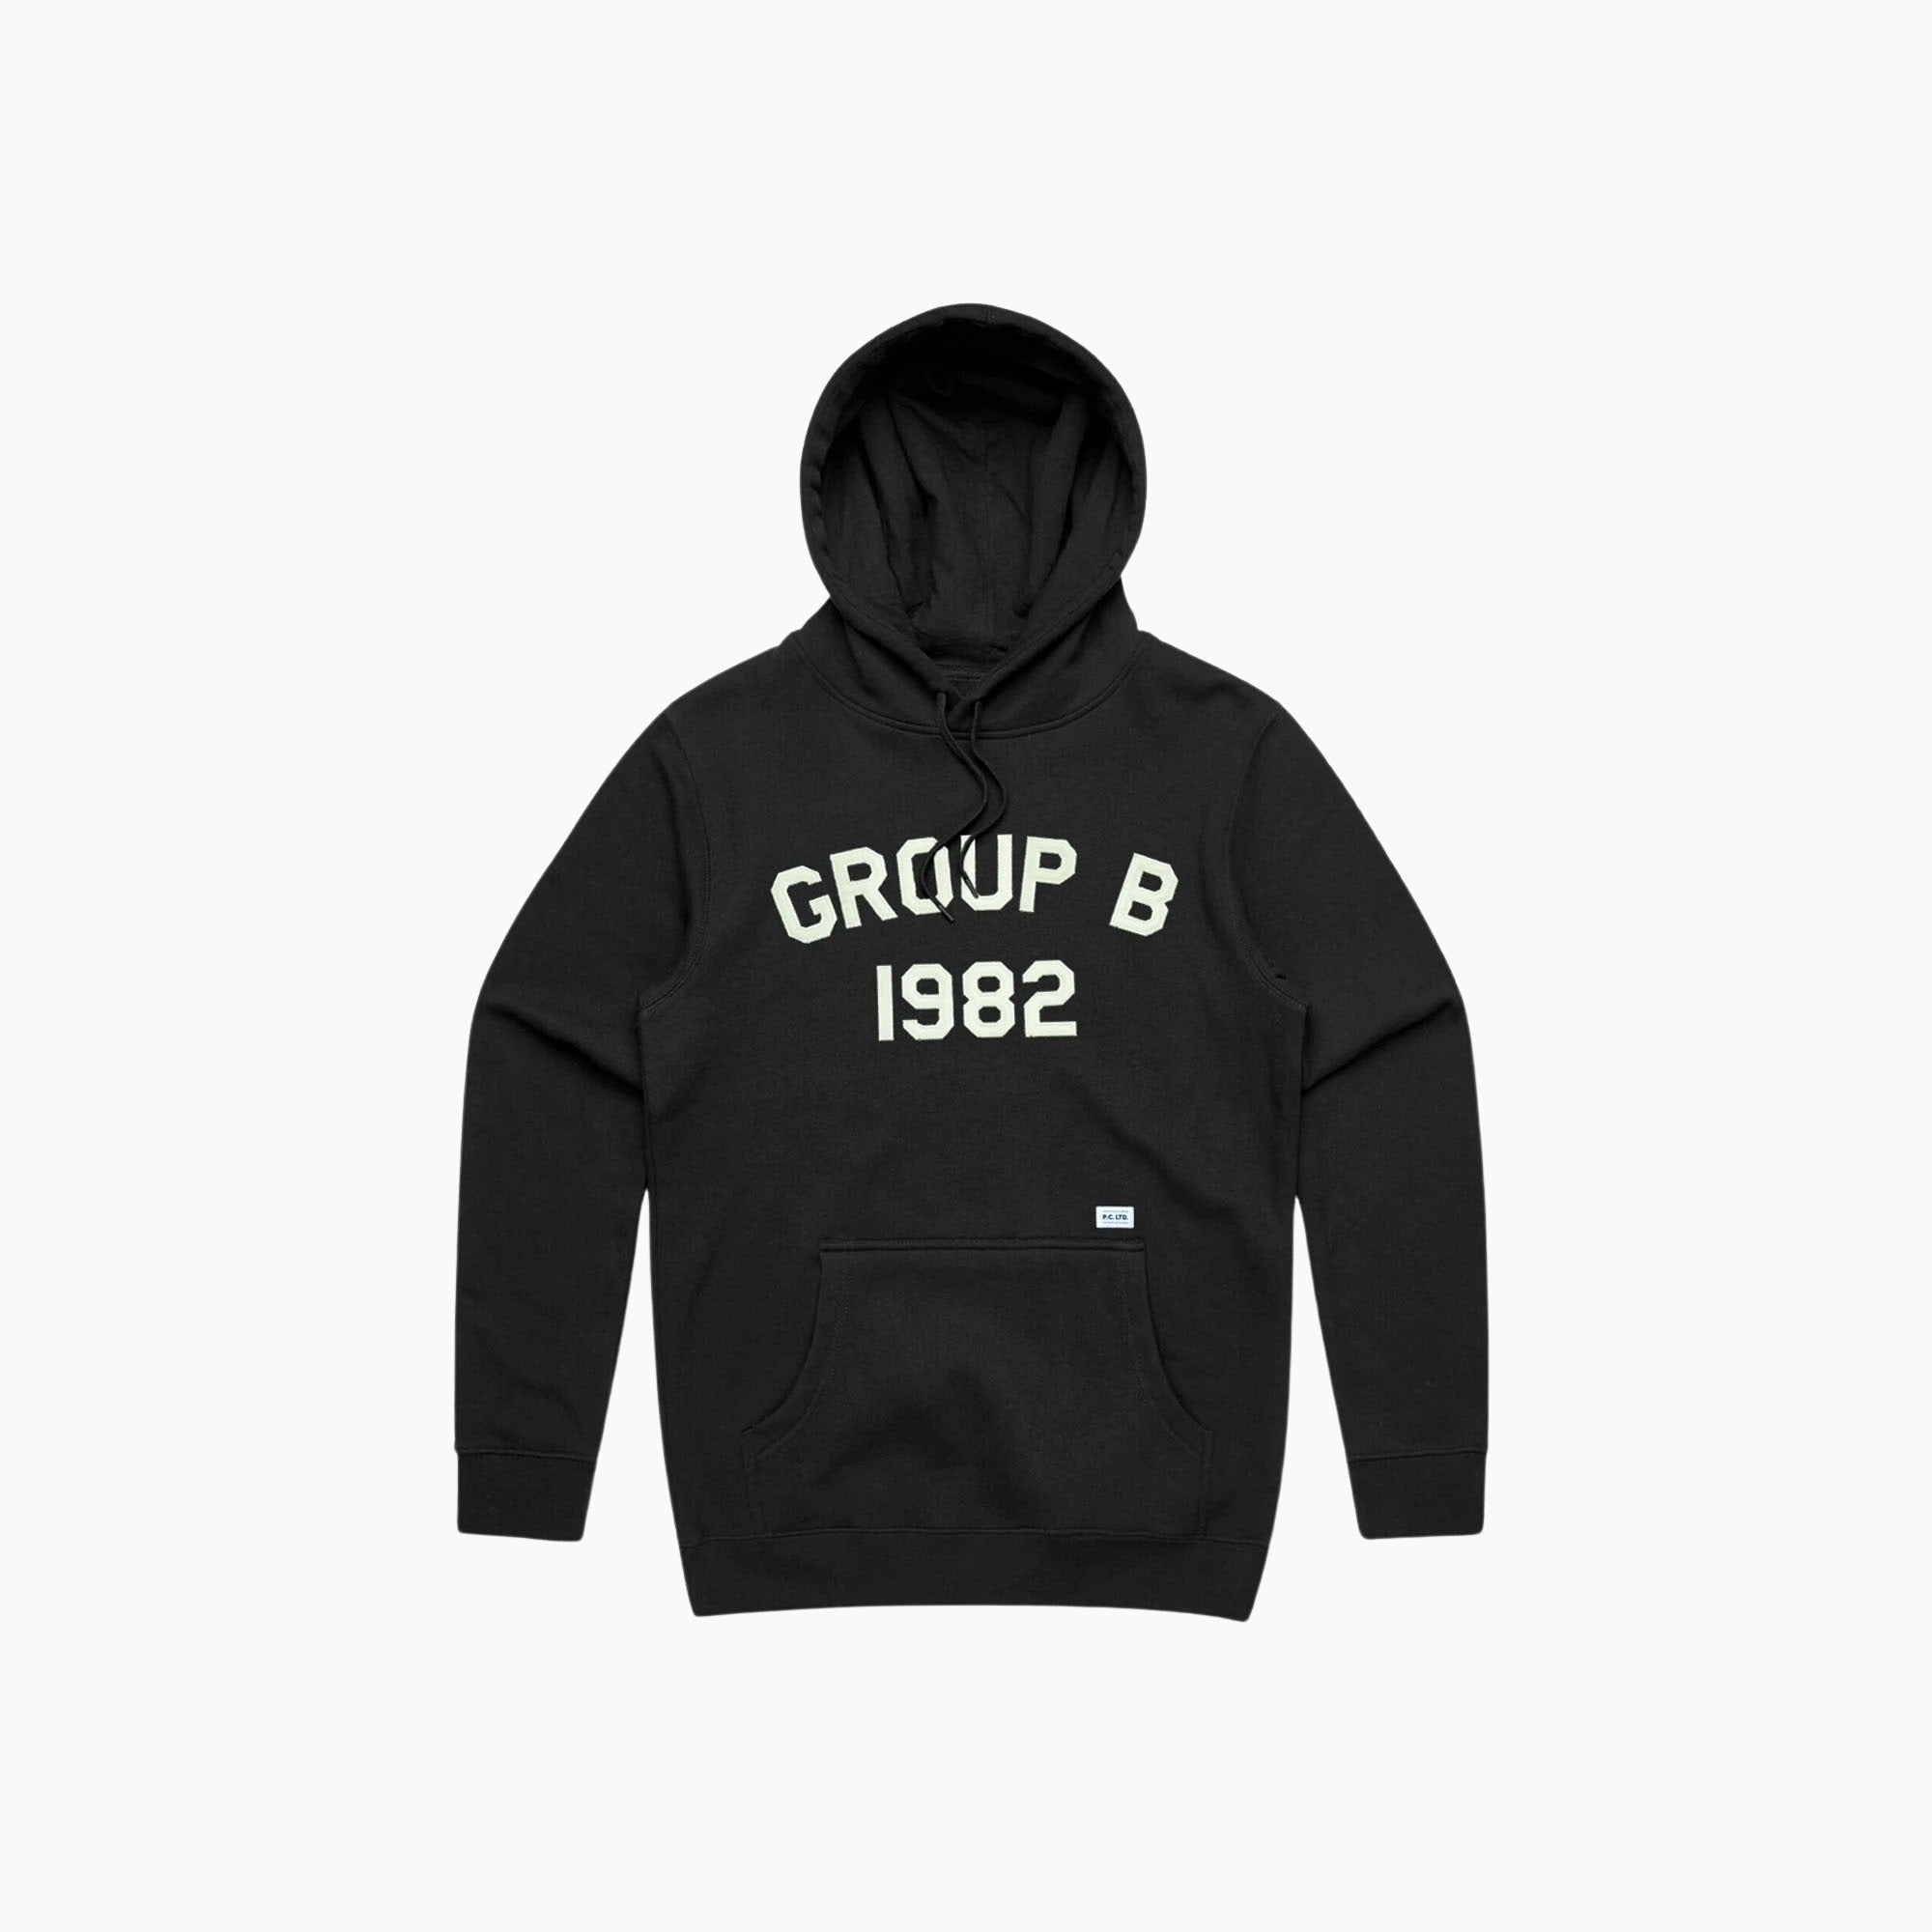 Period Correct | Group B Applique Hoodie-Hoodie-Period Correct-gpx-store